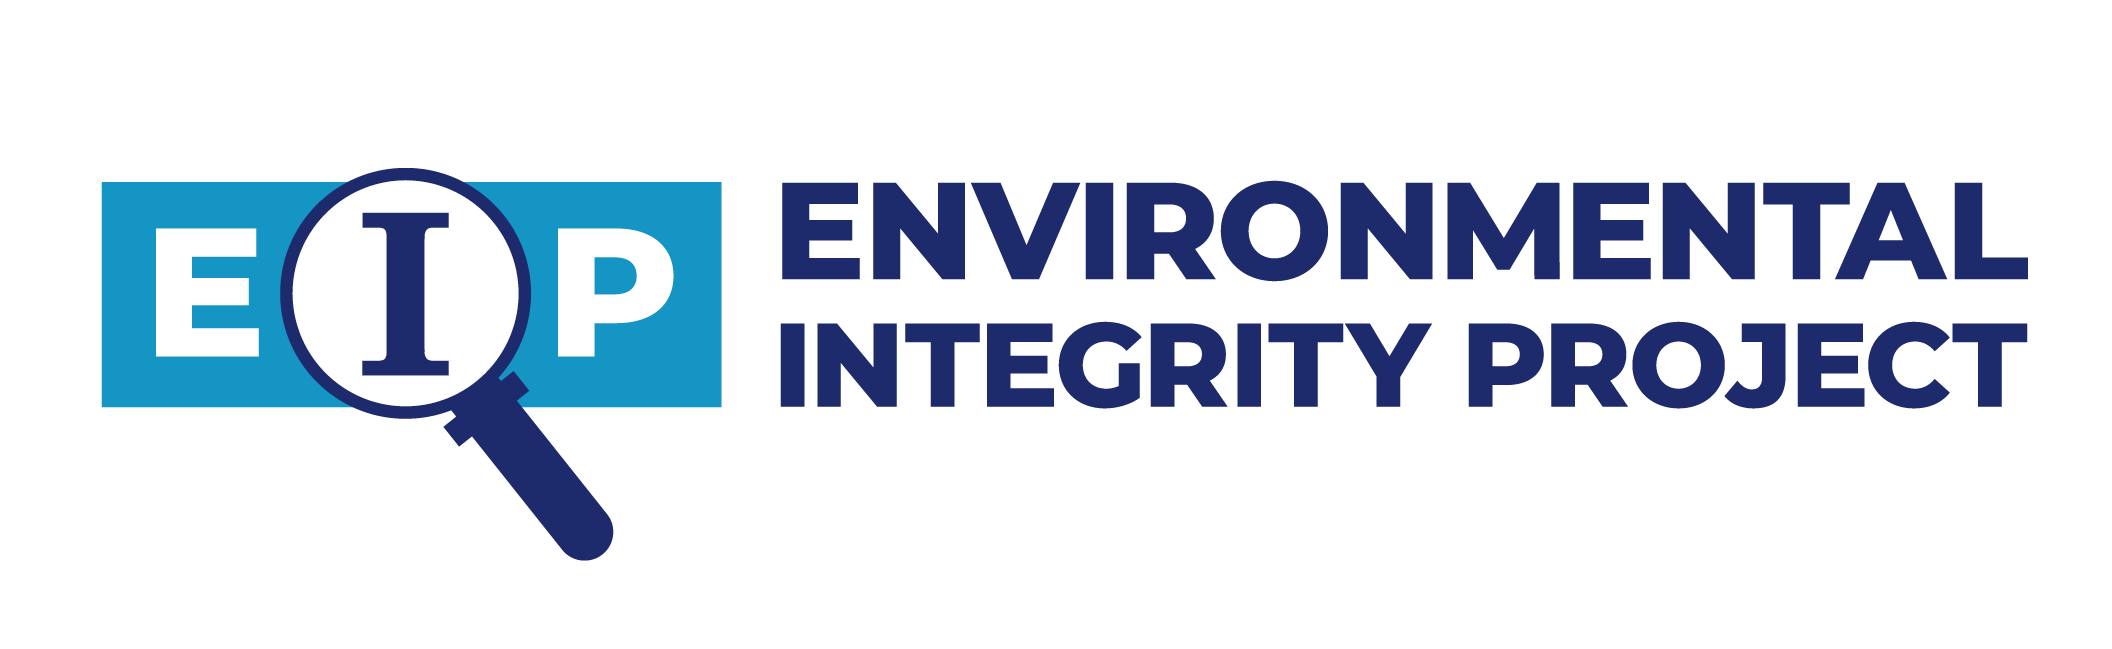 Environmental Integrity » Rapid Growth of Houston Plastics Industry Increases Air Pollution and Safety Risks